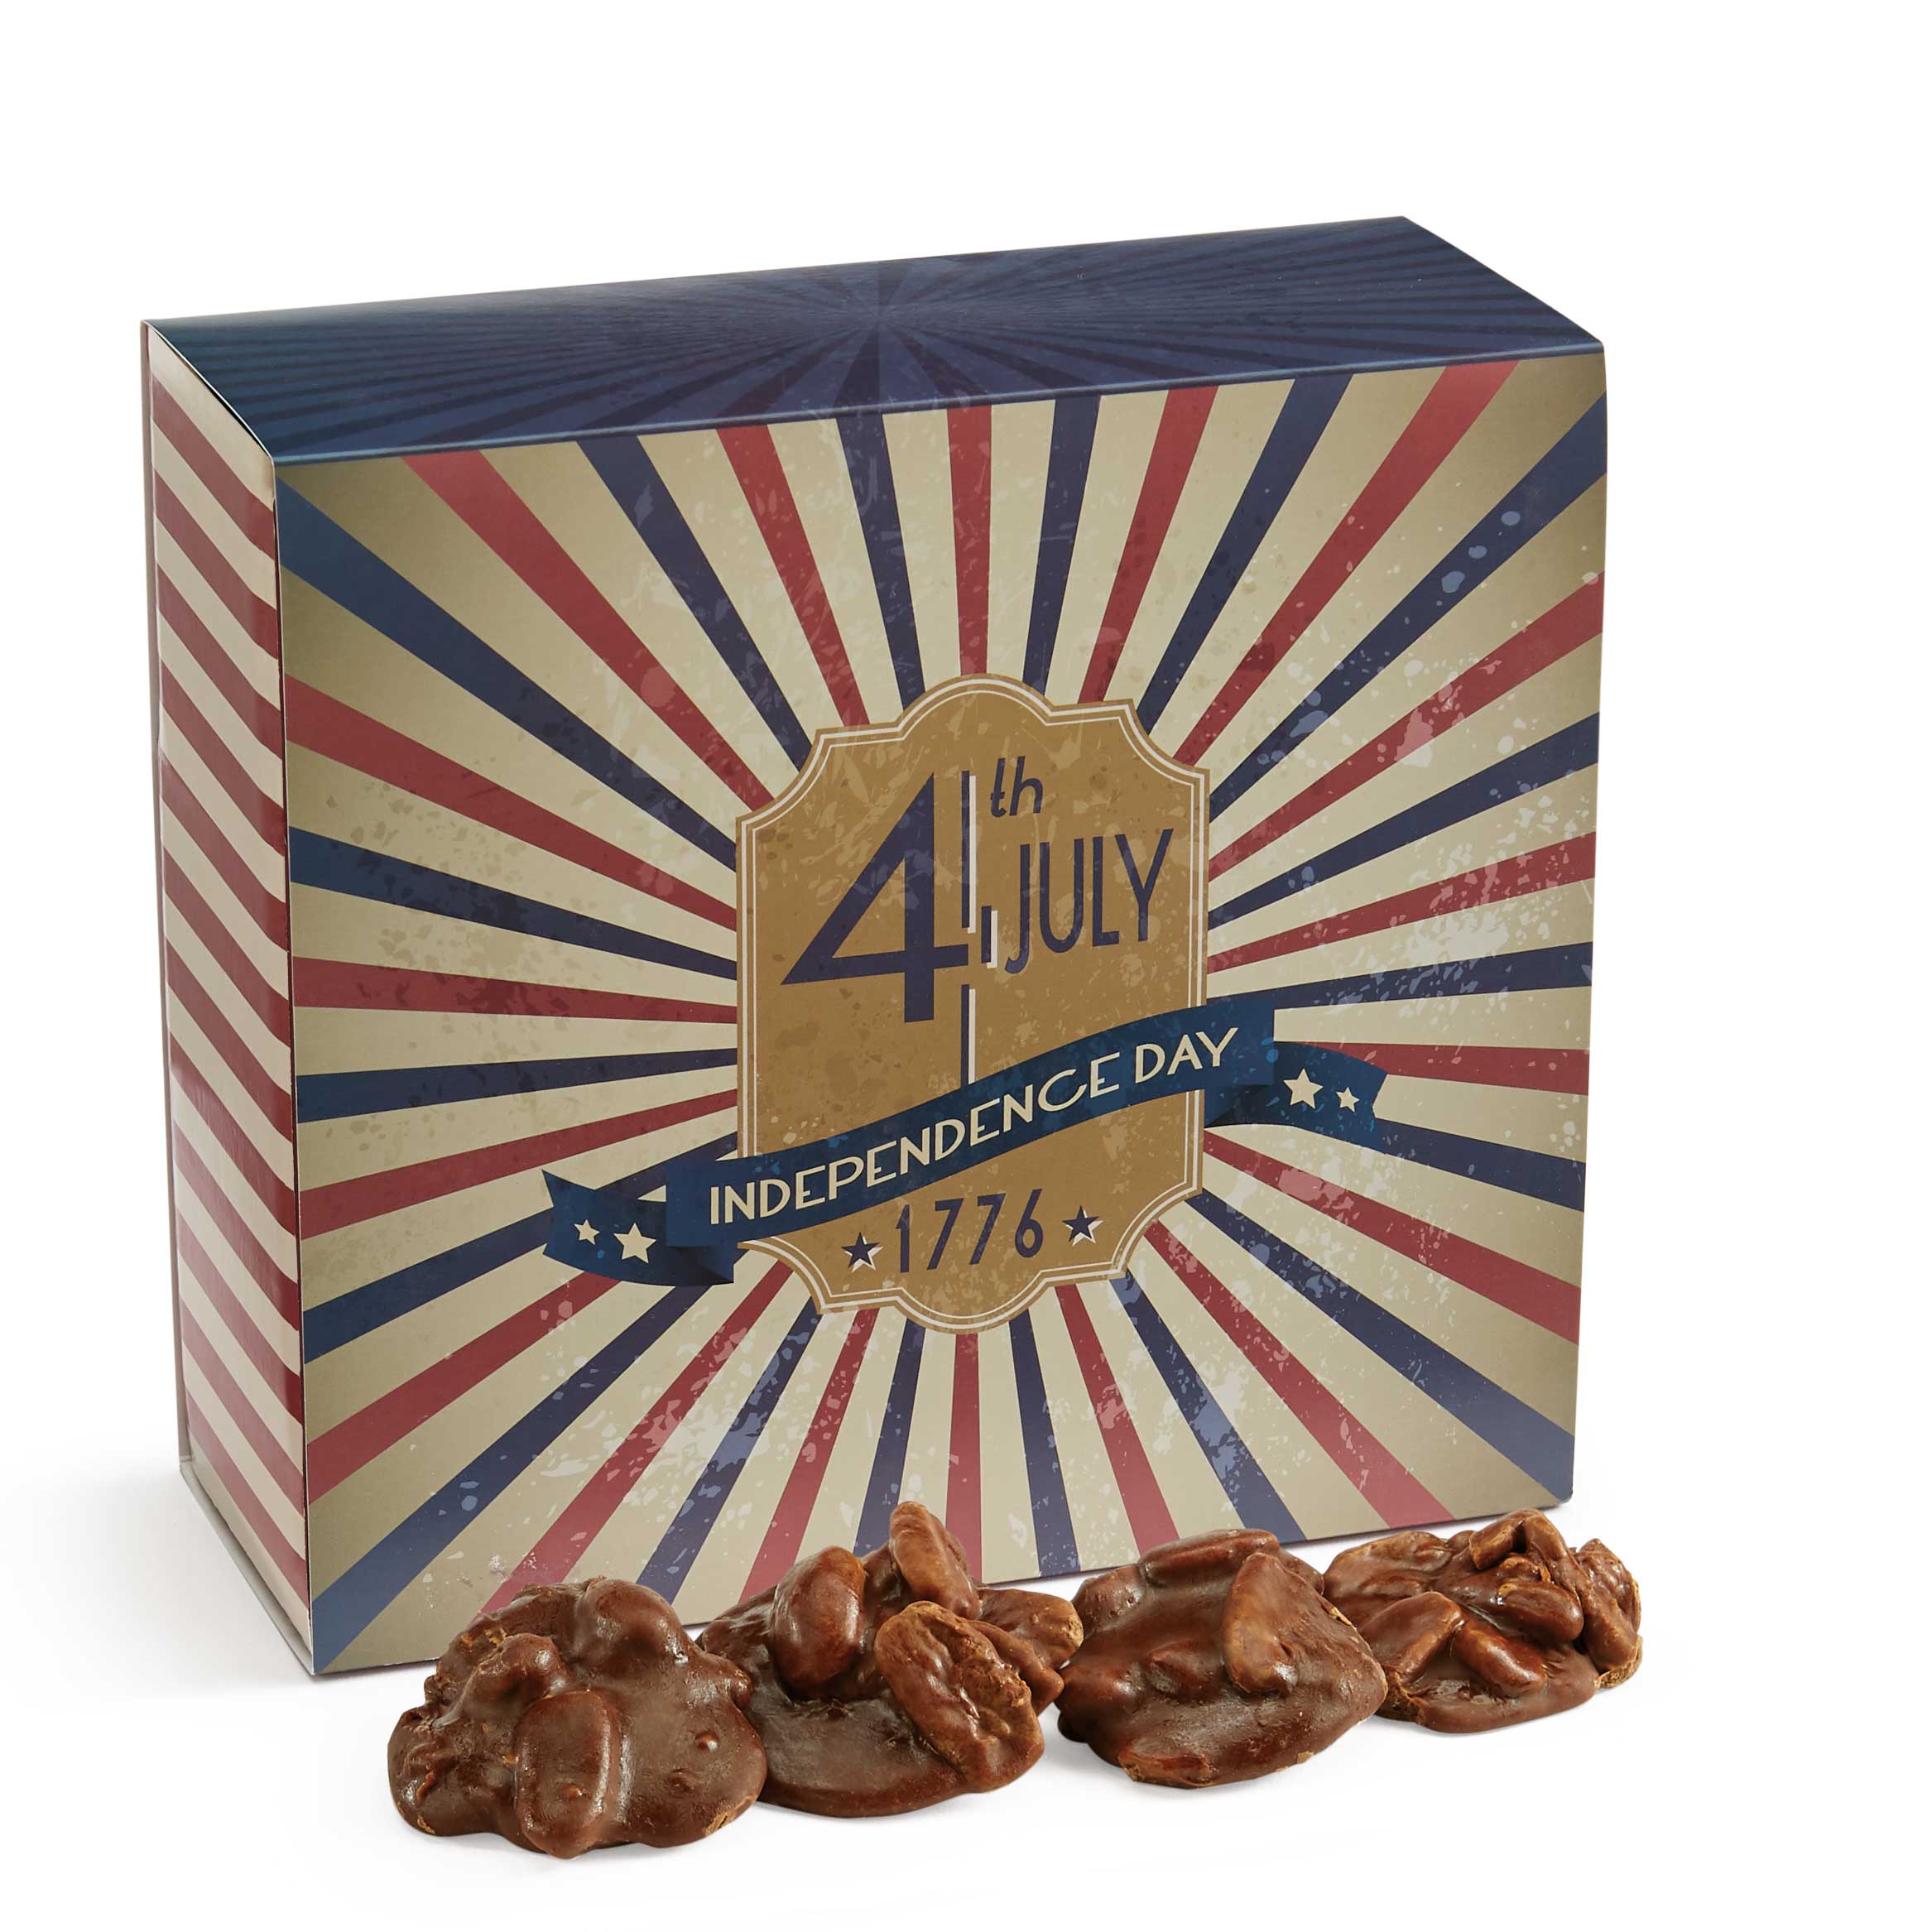 24 Piece Chocolate Pralines in the 4th of July Gift Box